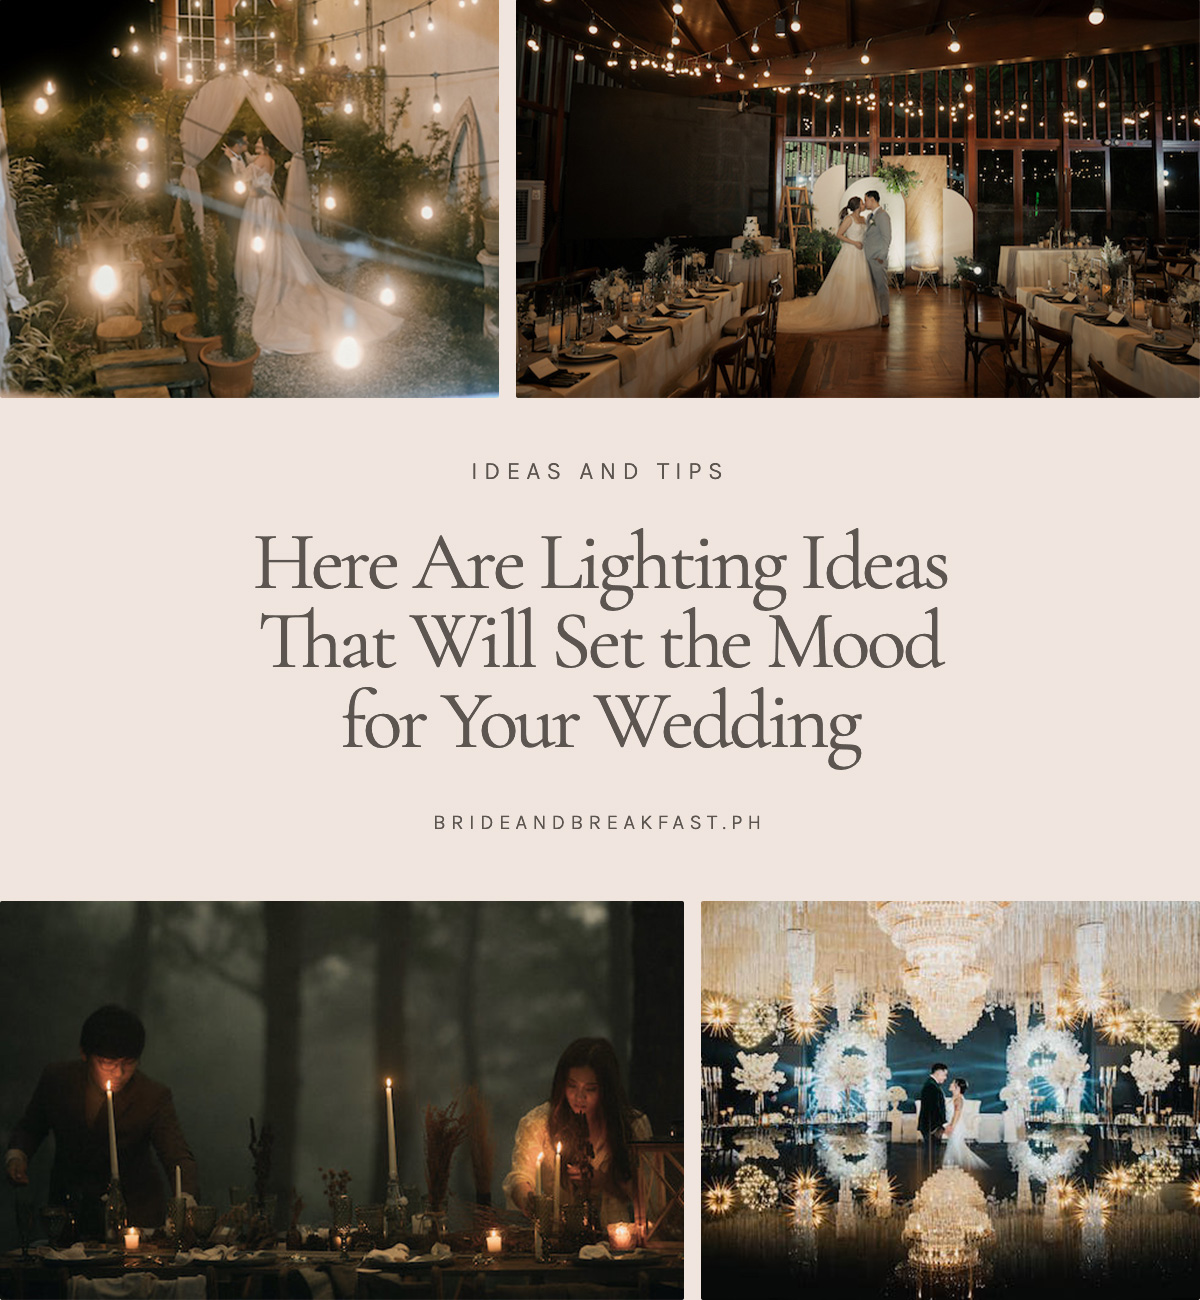 Here Are Lighting Ideas That Will Set the Mood for Your Wedding